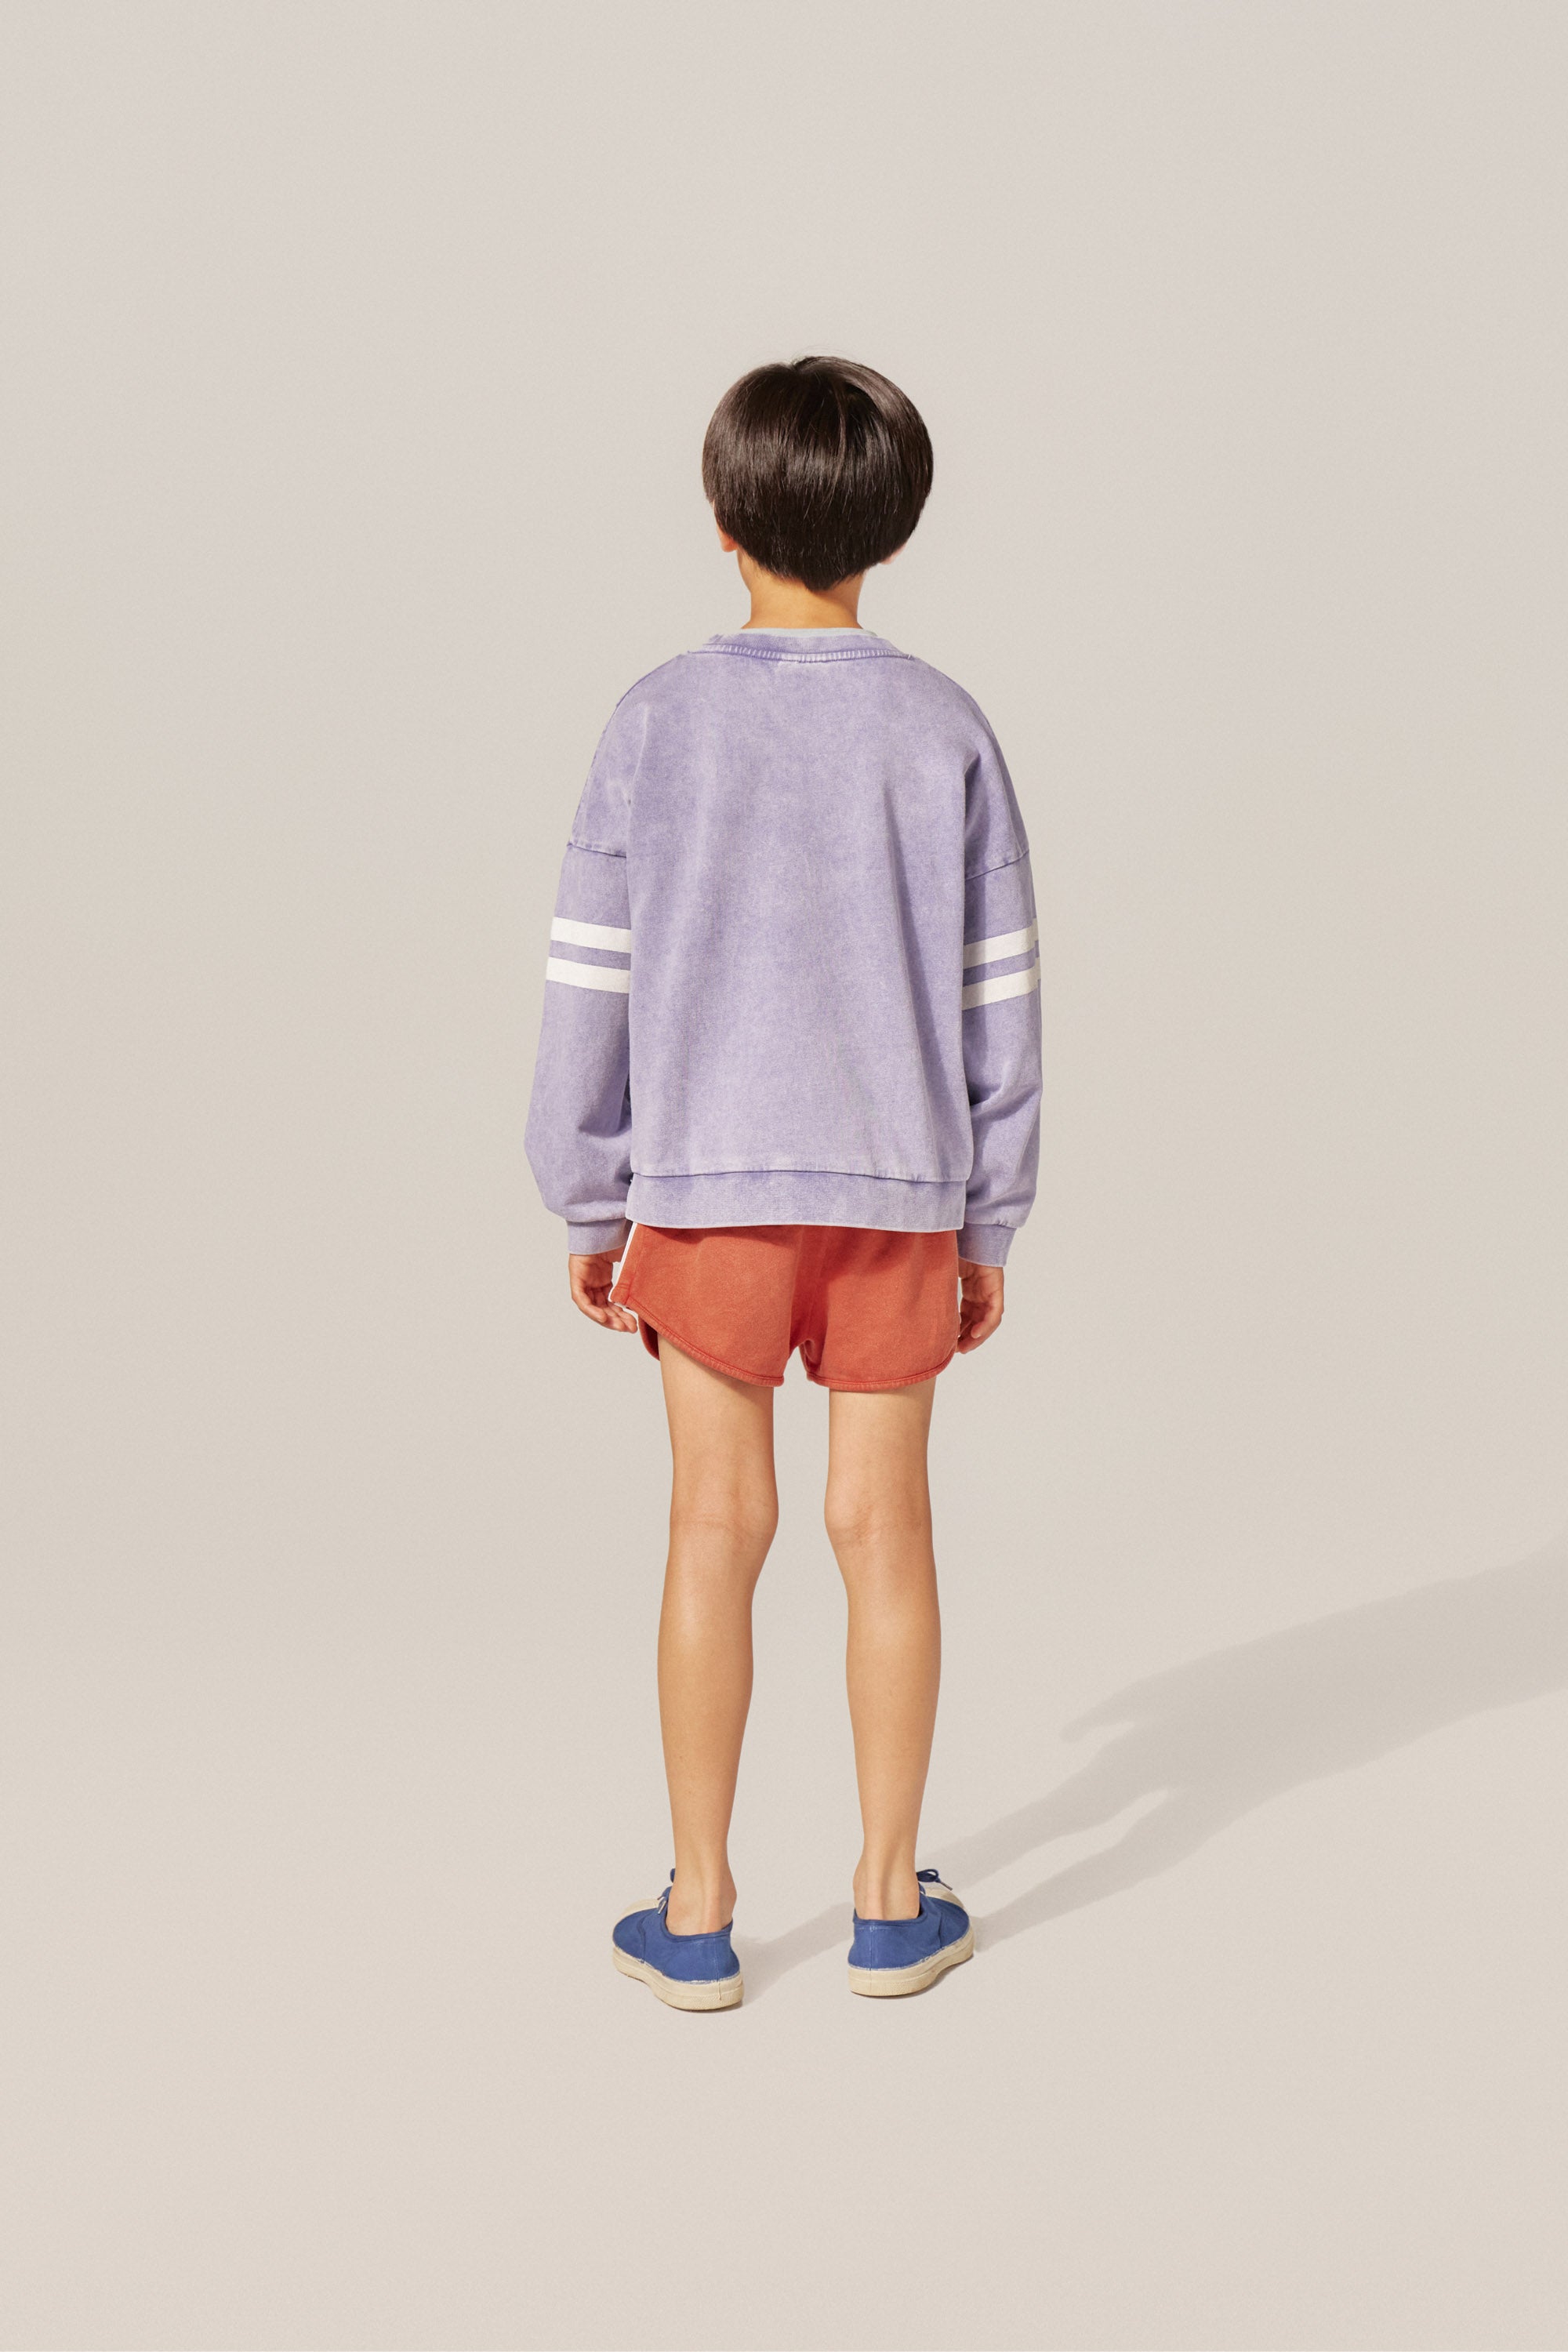 The Campamento - red sporty kids shorts